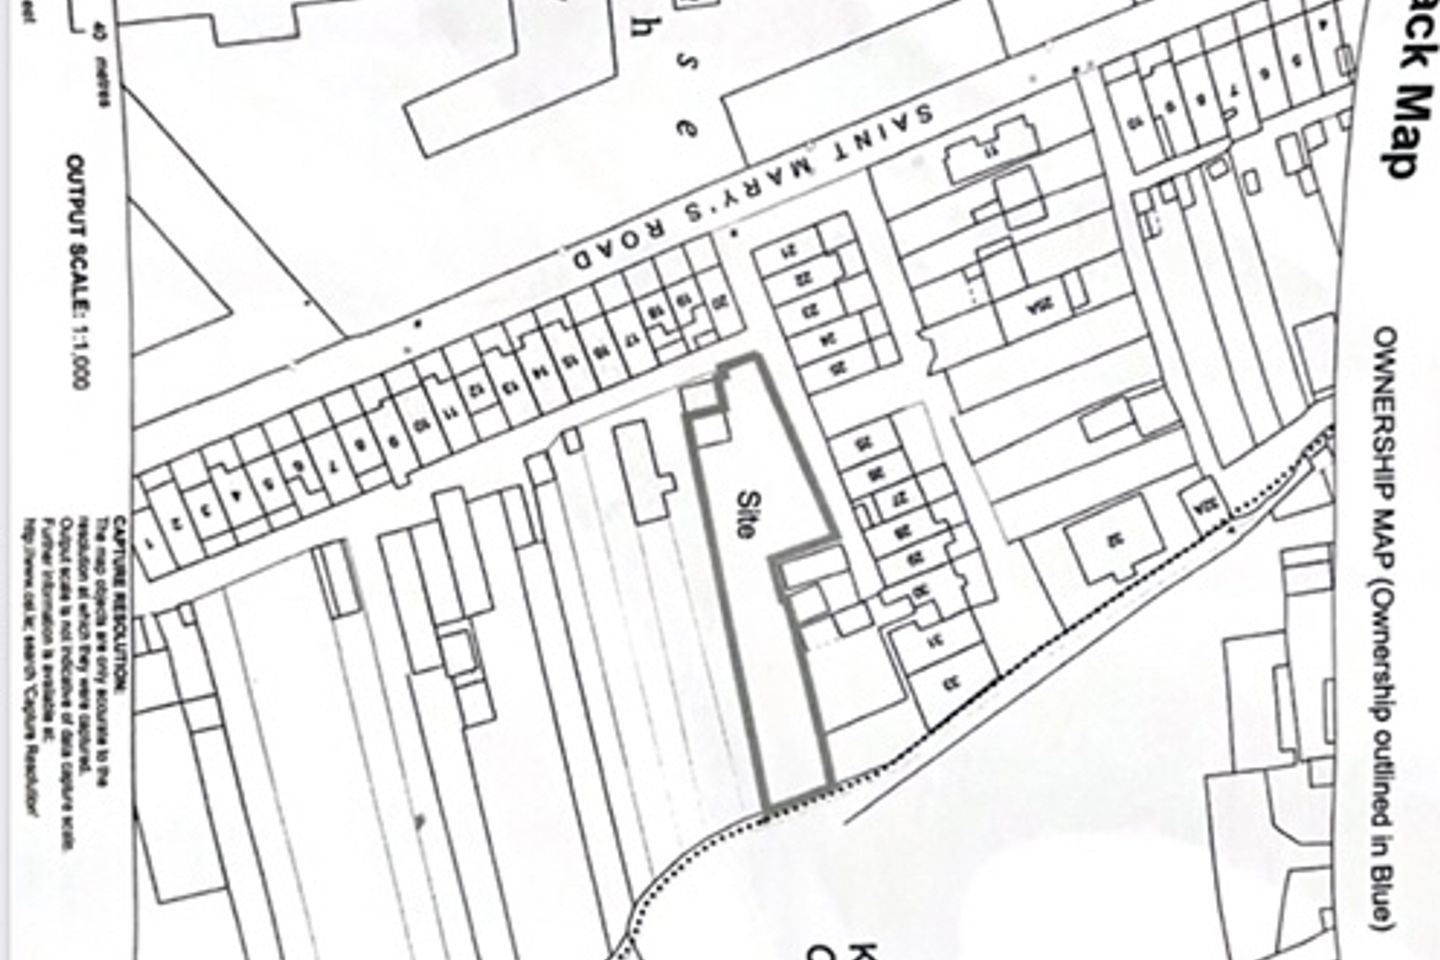 0.179 Acre Site with O.P.P, St. Mary's Terrace, Killarney, Co. Kerry